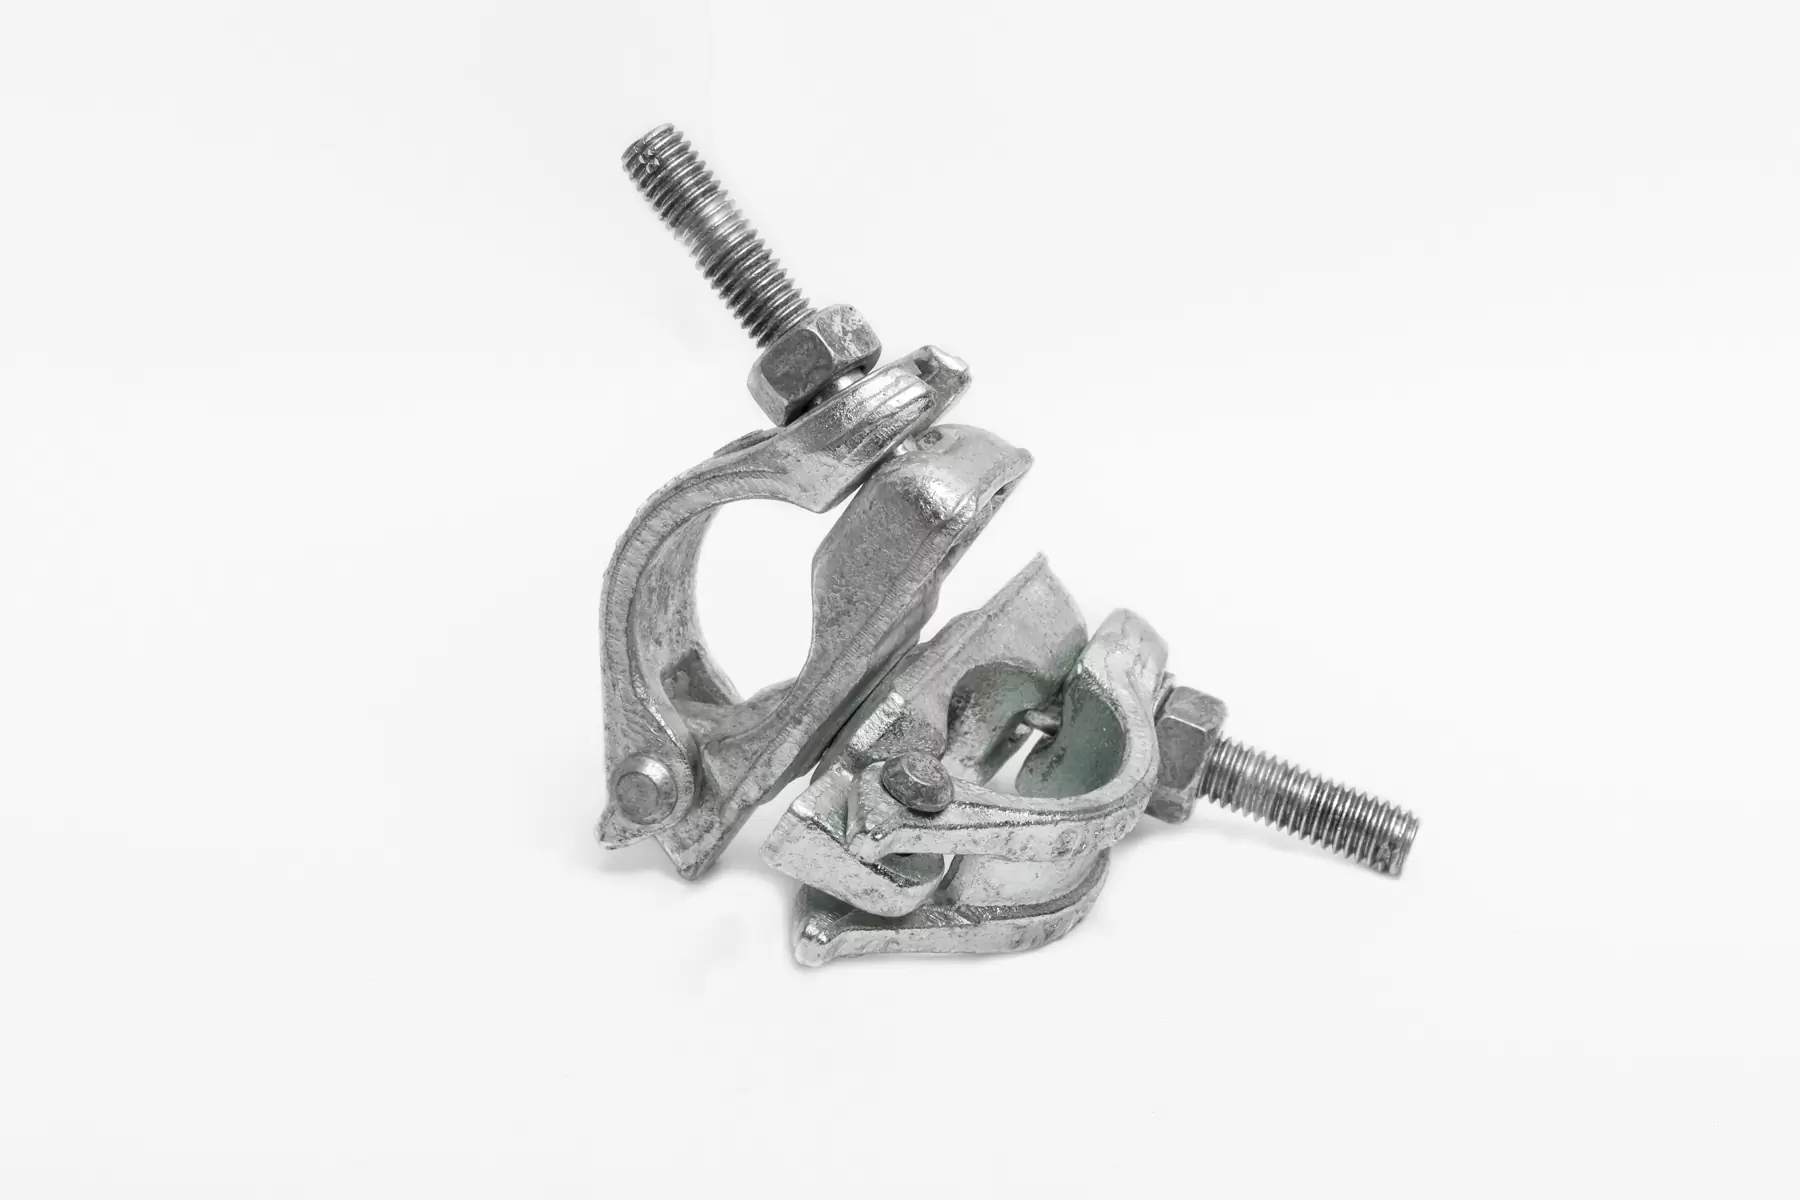 Drop Forged Swivel Coupler (bags of 25)